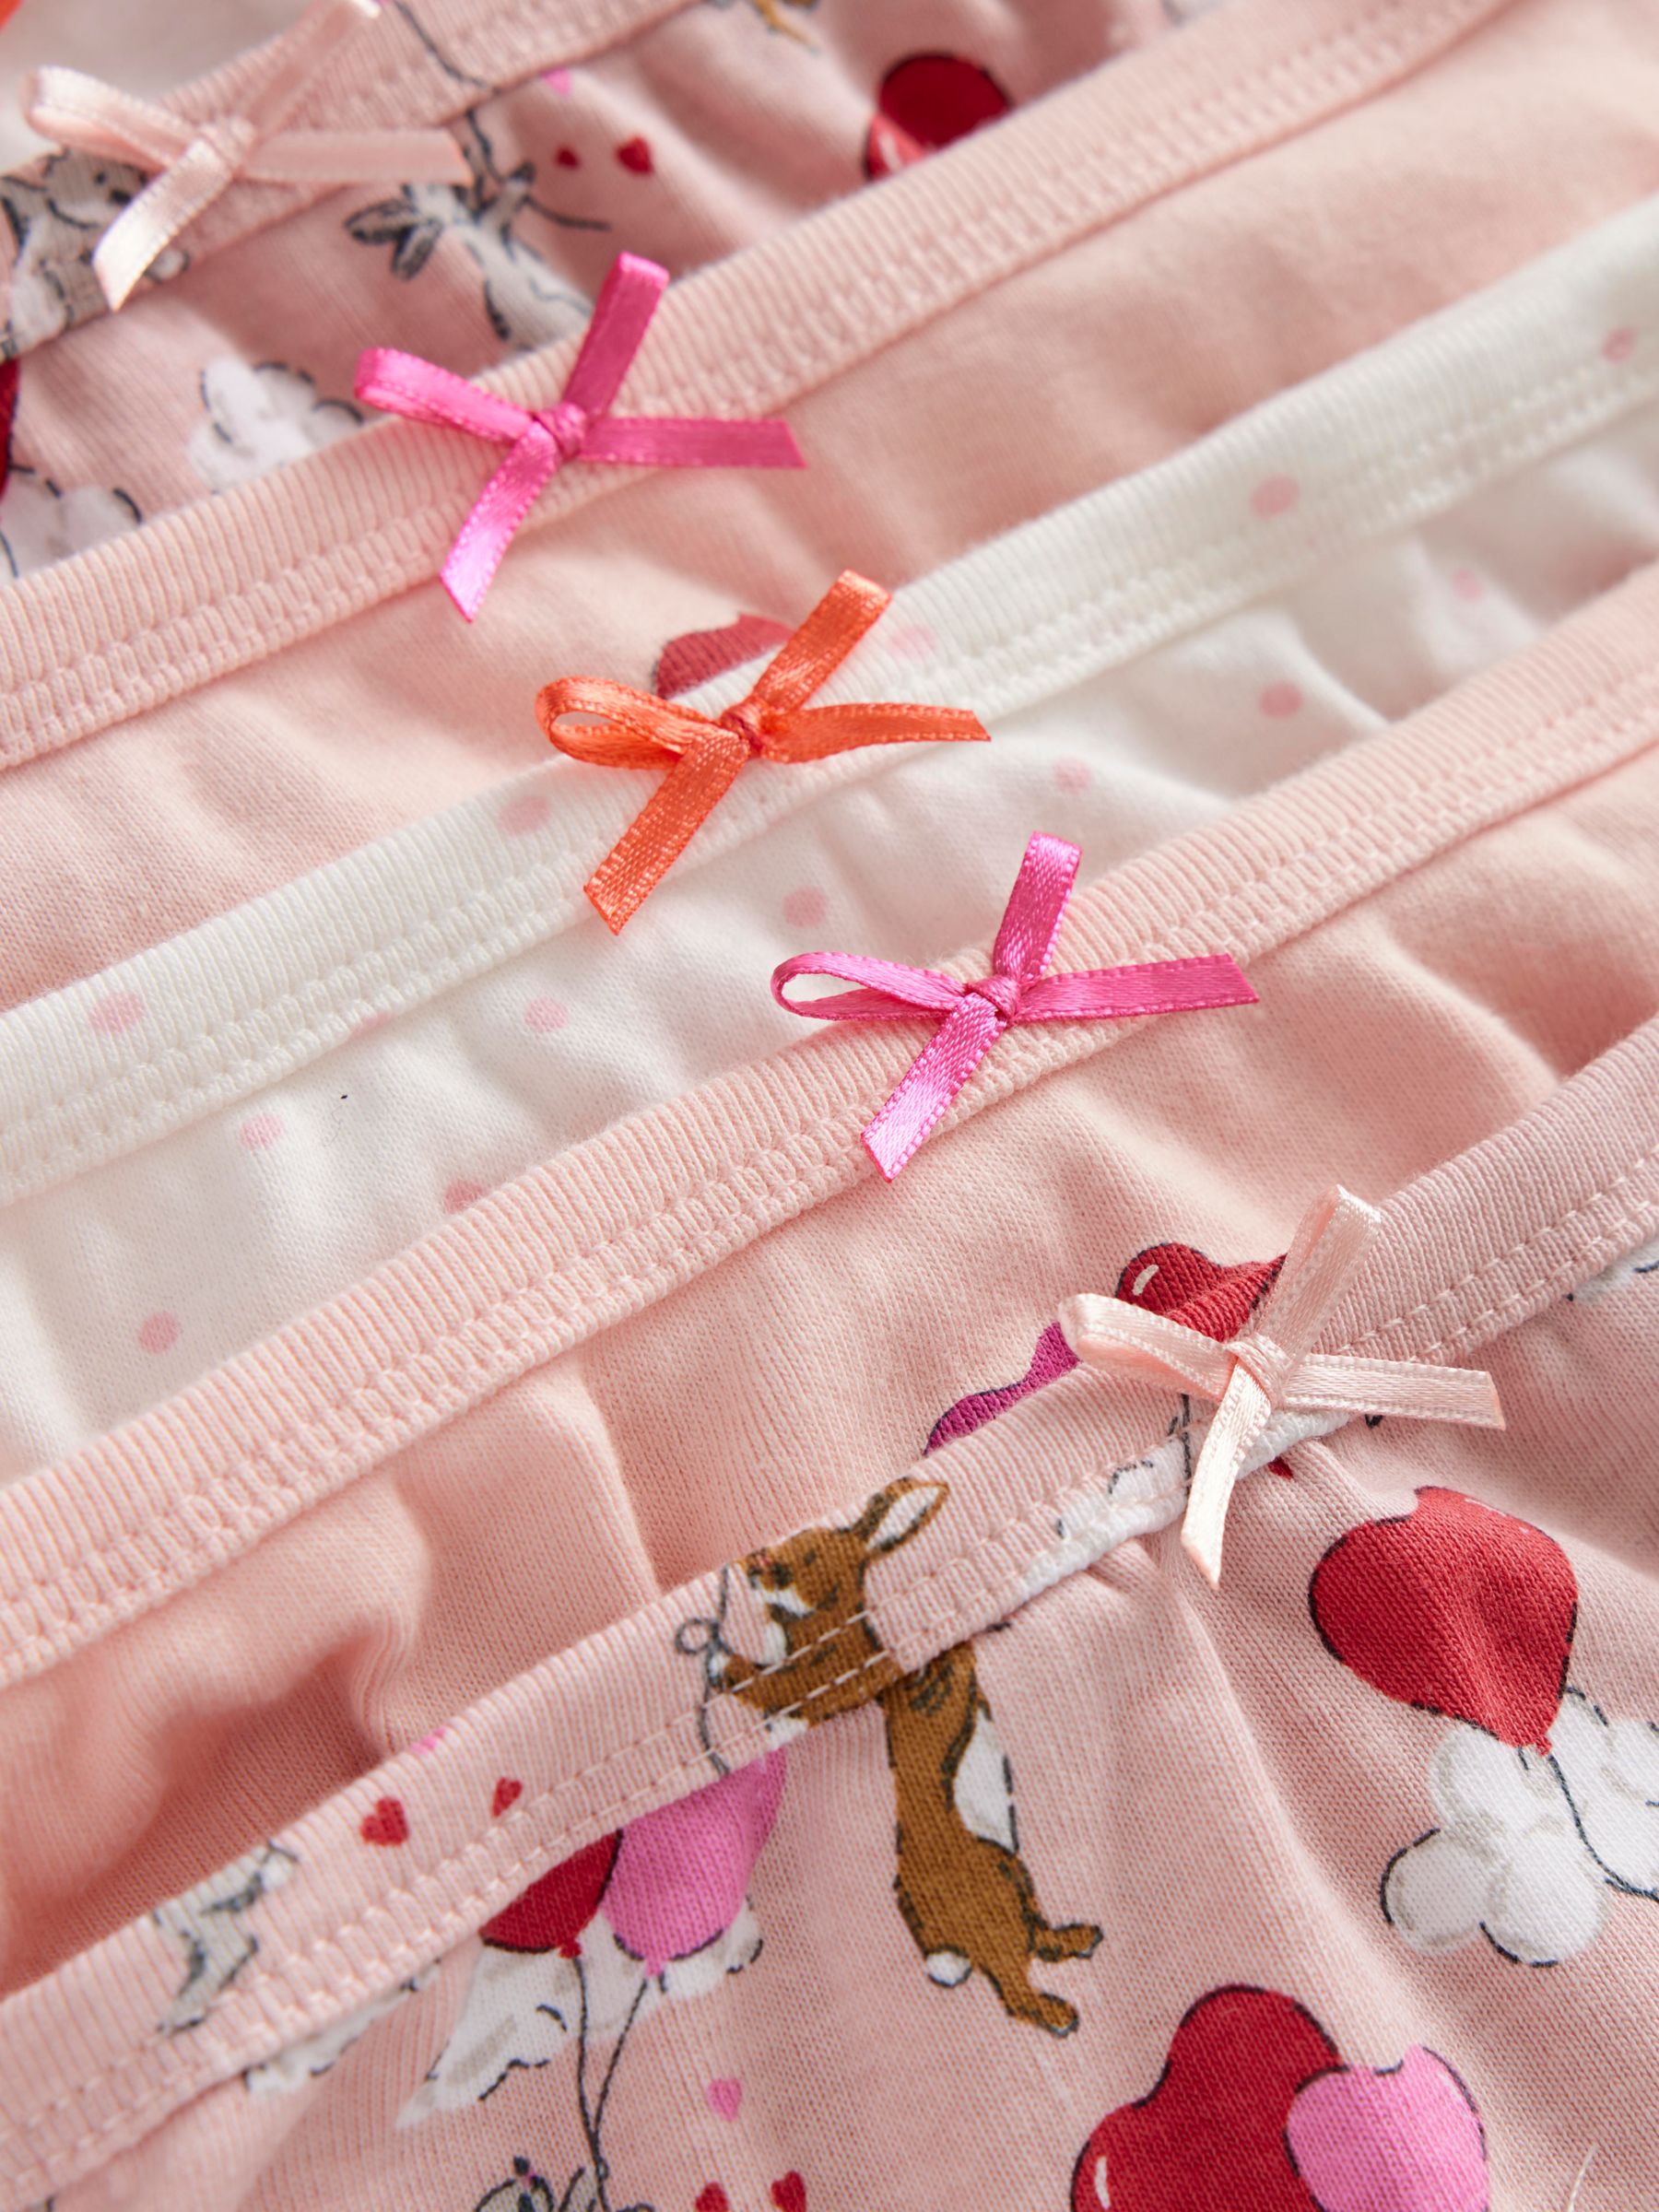 Buy Mini Boden Kids' Heart Knickers, Pack of 7, Multi Online at johnlewis.com